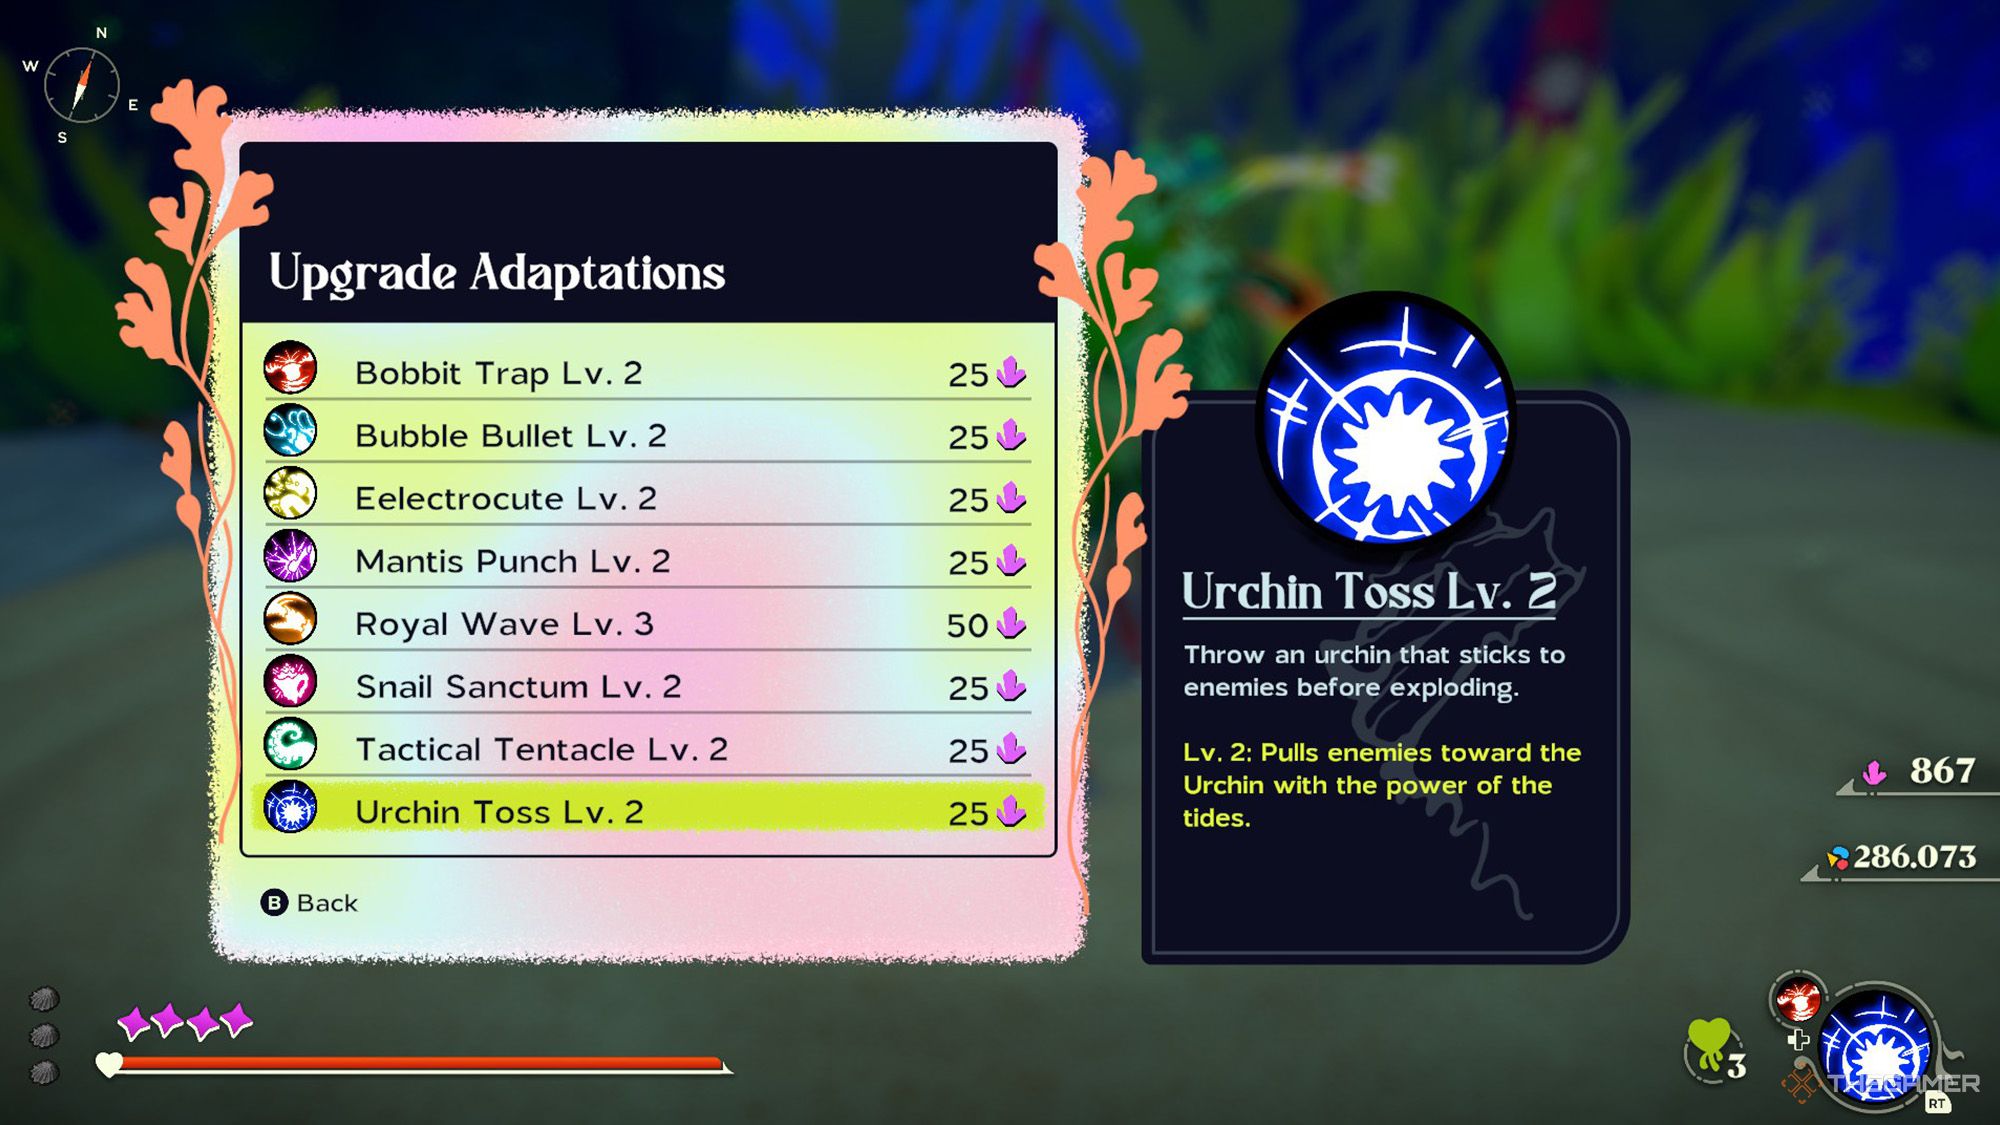 Another Crab's Treasure - Topoda's adaptation upgrade screen displays eight different upgrades